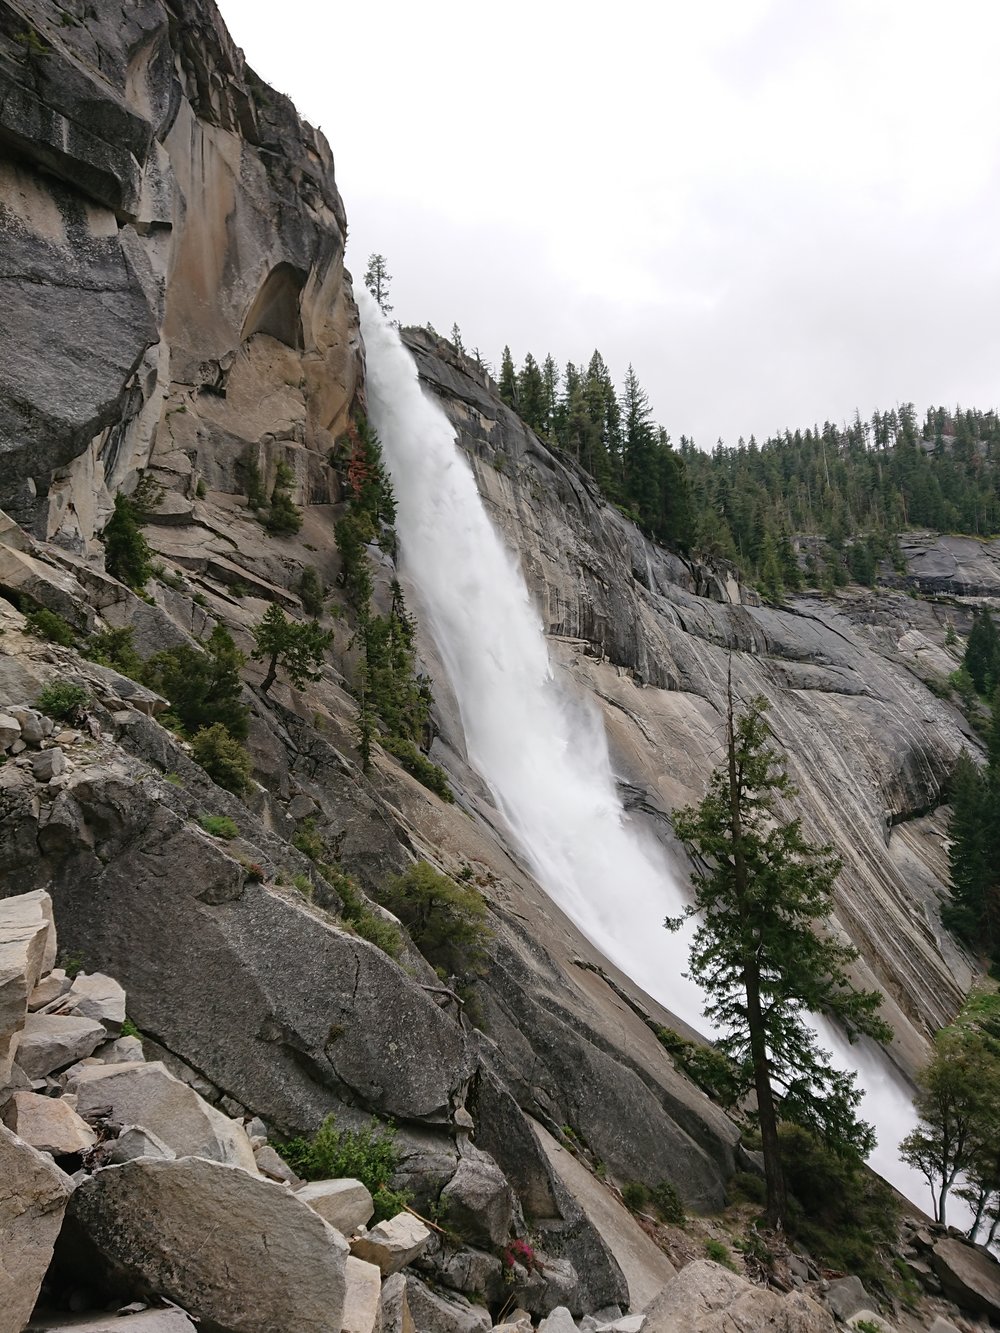  The impressive Nevada Falls from the Mist Trail 